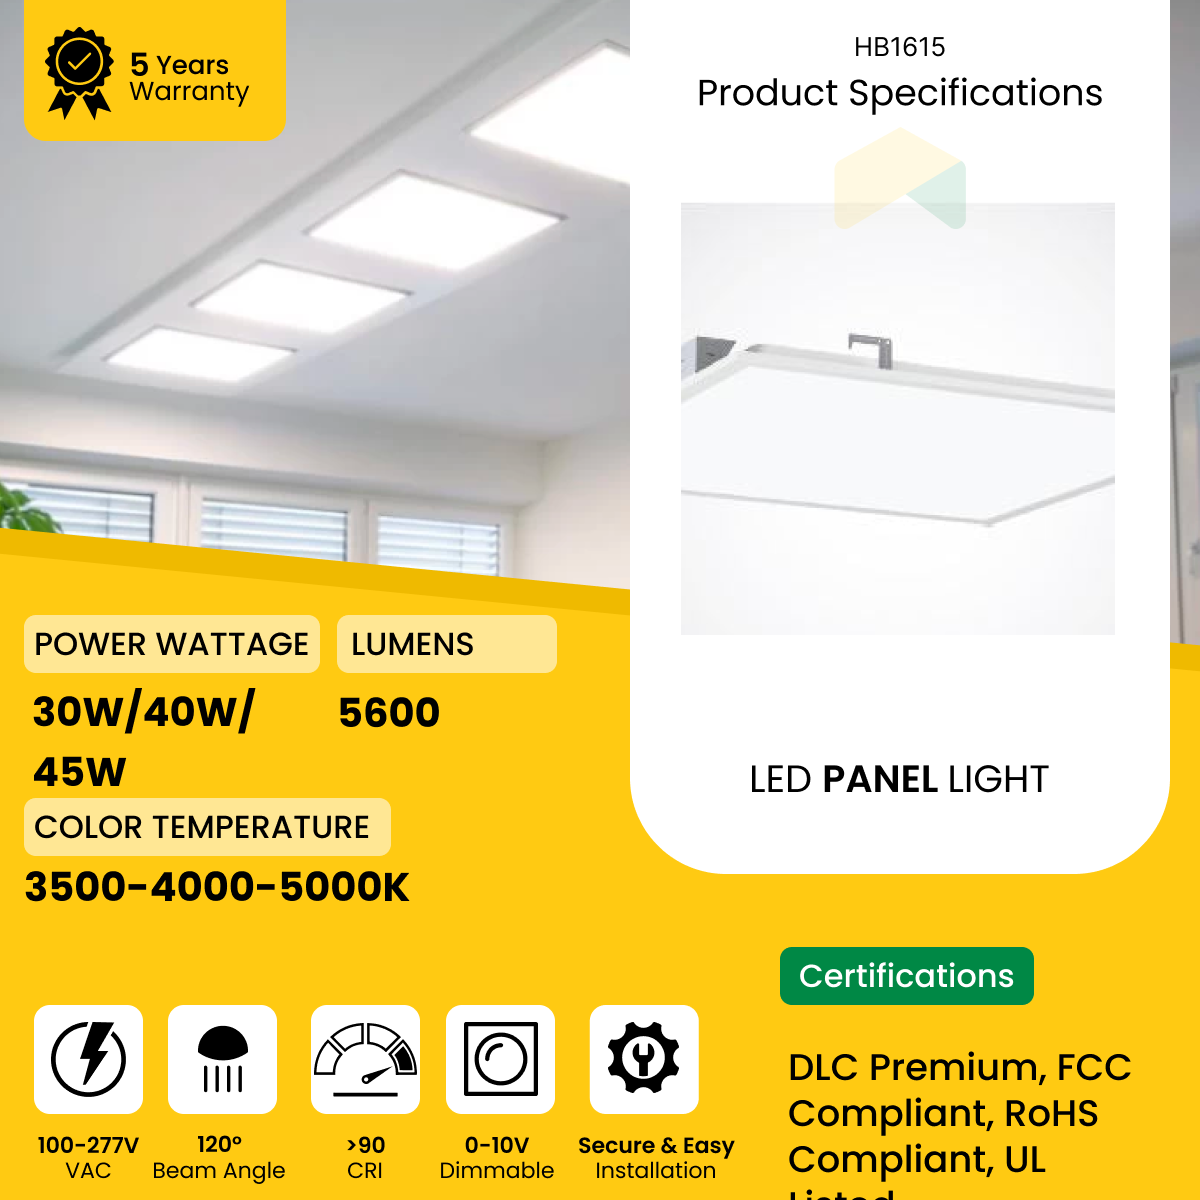 2X4 ft LED Flat Backlite Panel - Wattage Adjustable (30W/40W/45W) - CCT Changeable (3500K/4000K/5000K) - 130LM/Watt - 120-277VAC, 0-10V Dimmable - UL, DLC Premium Listed - 5 Years Warranty (2-Pack)